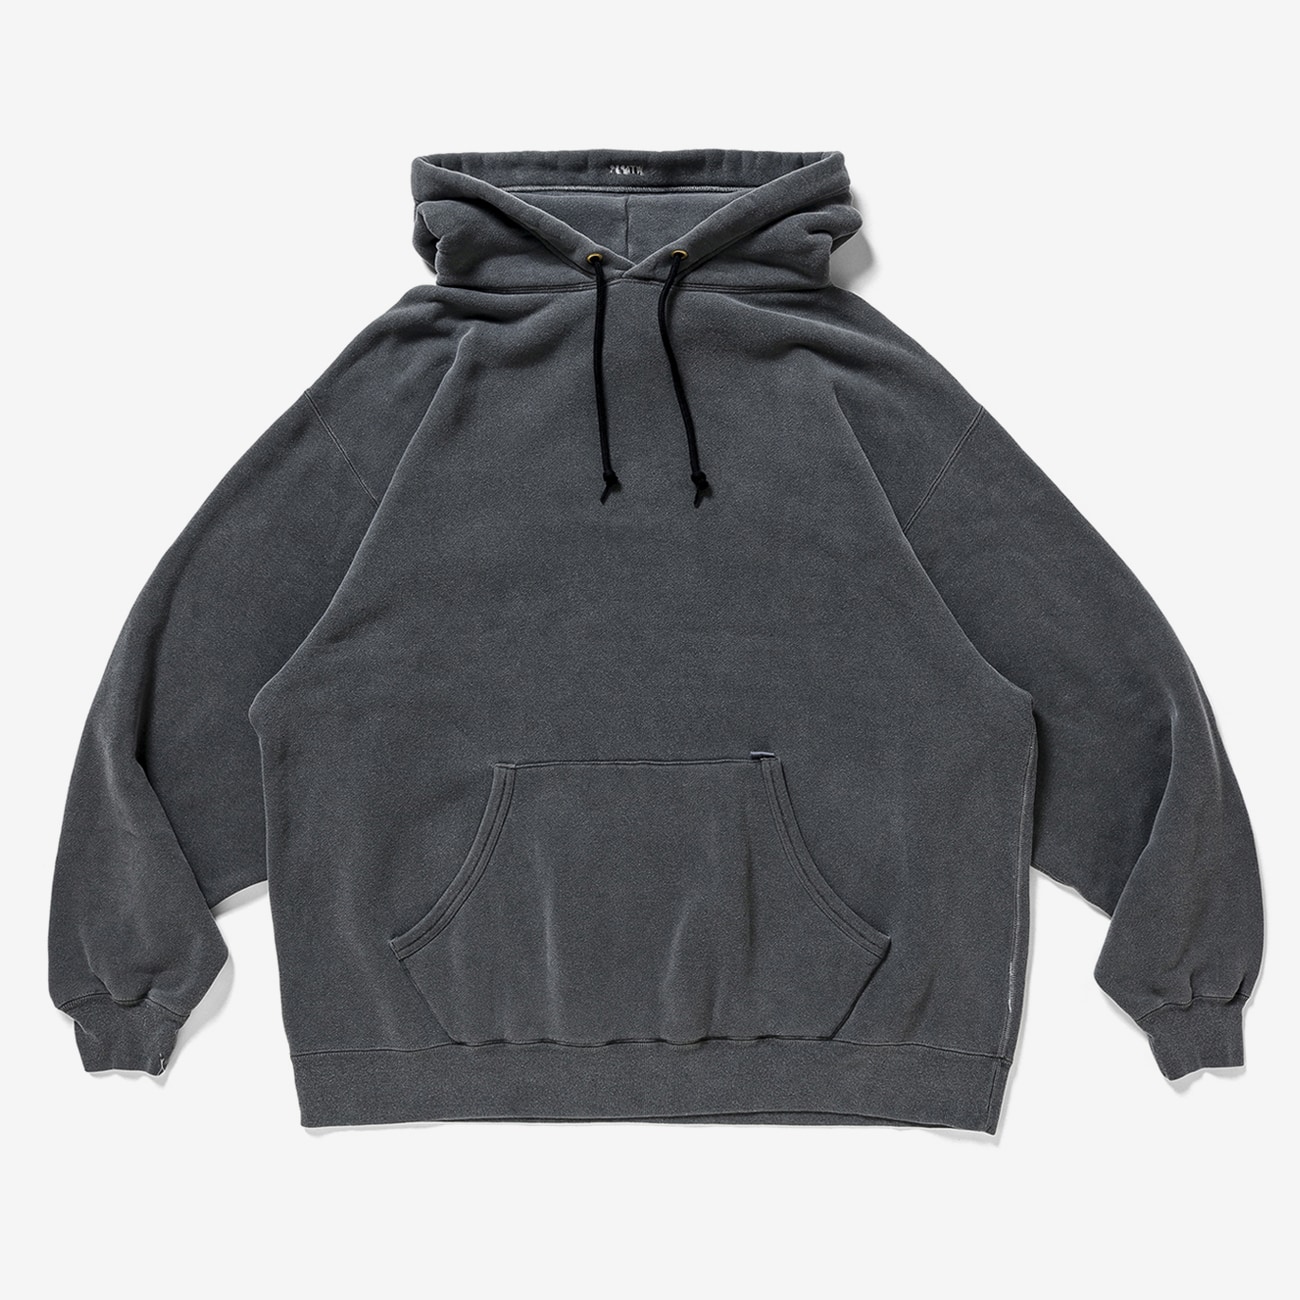 WTAPS BLANK 01 / HOODED / COTTON REVIEW | FASHION LAB